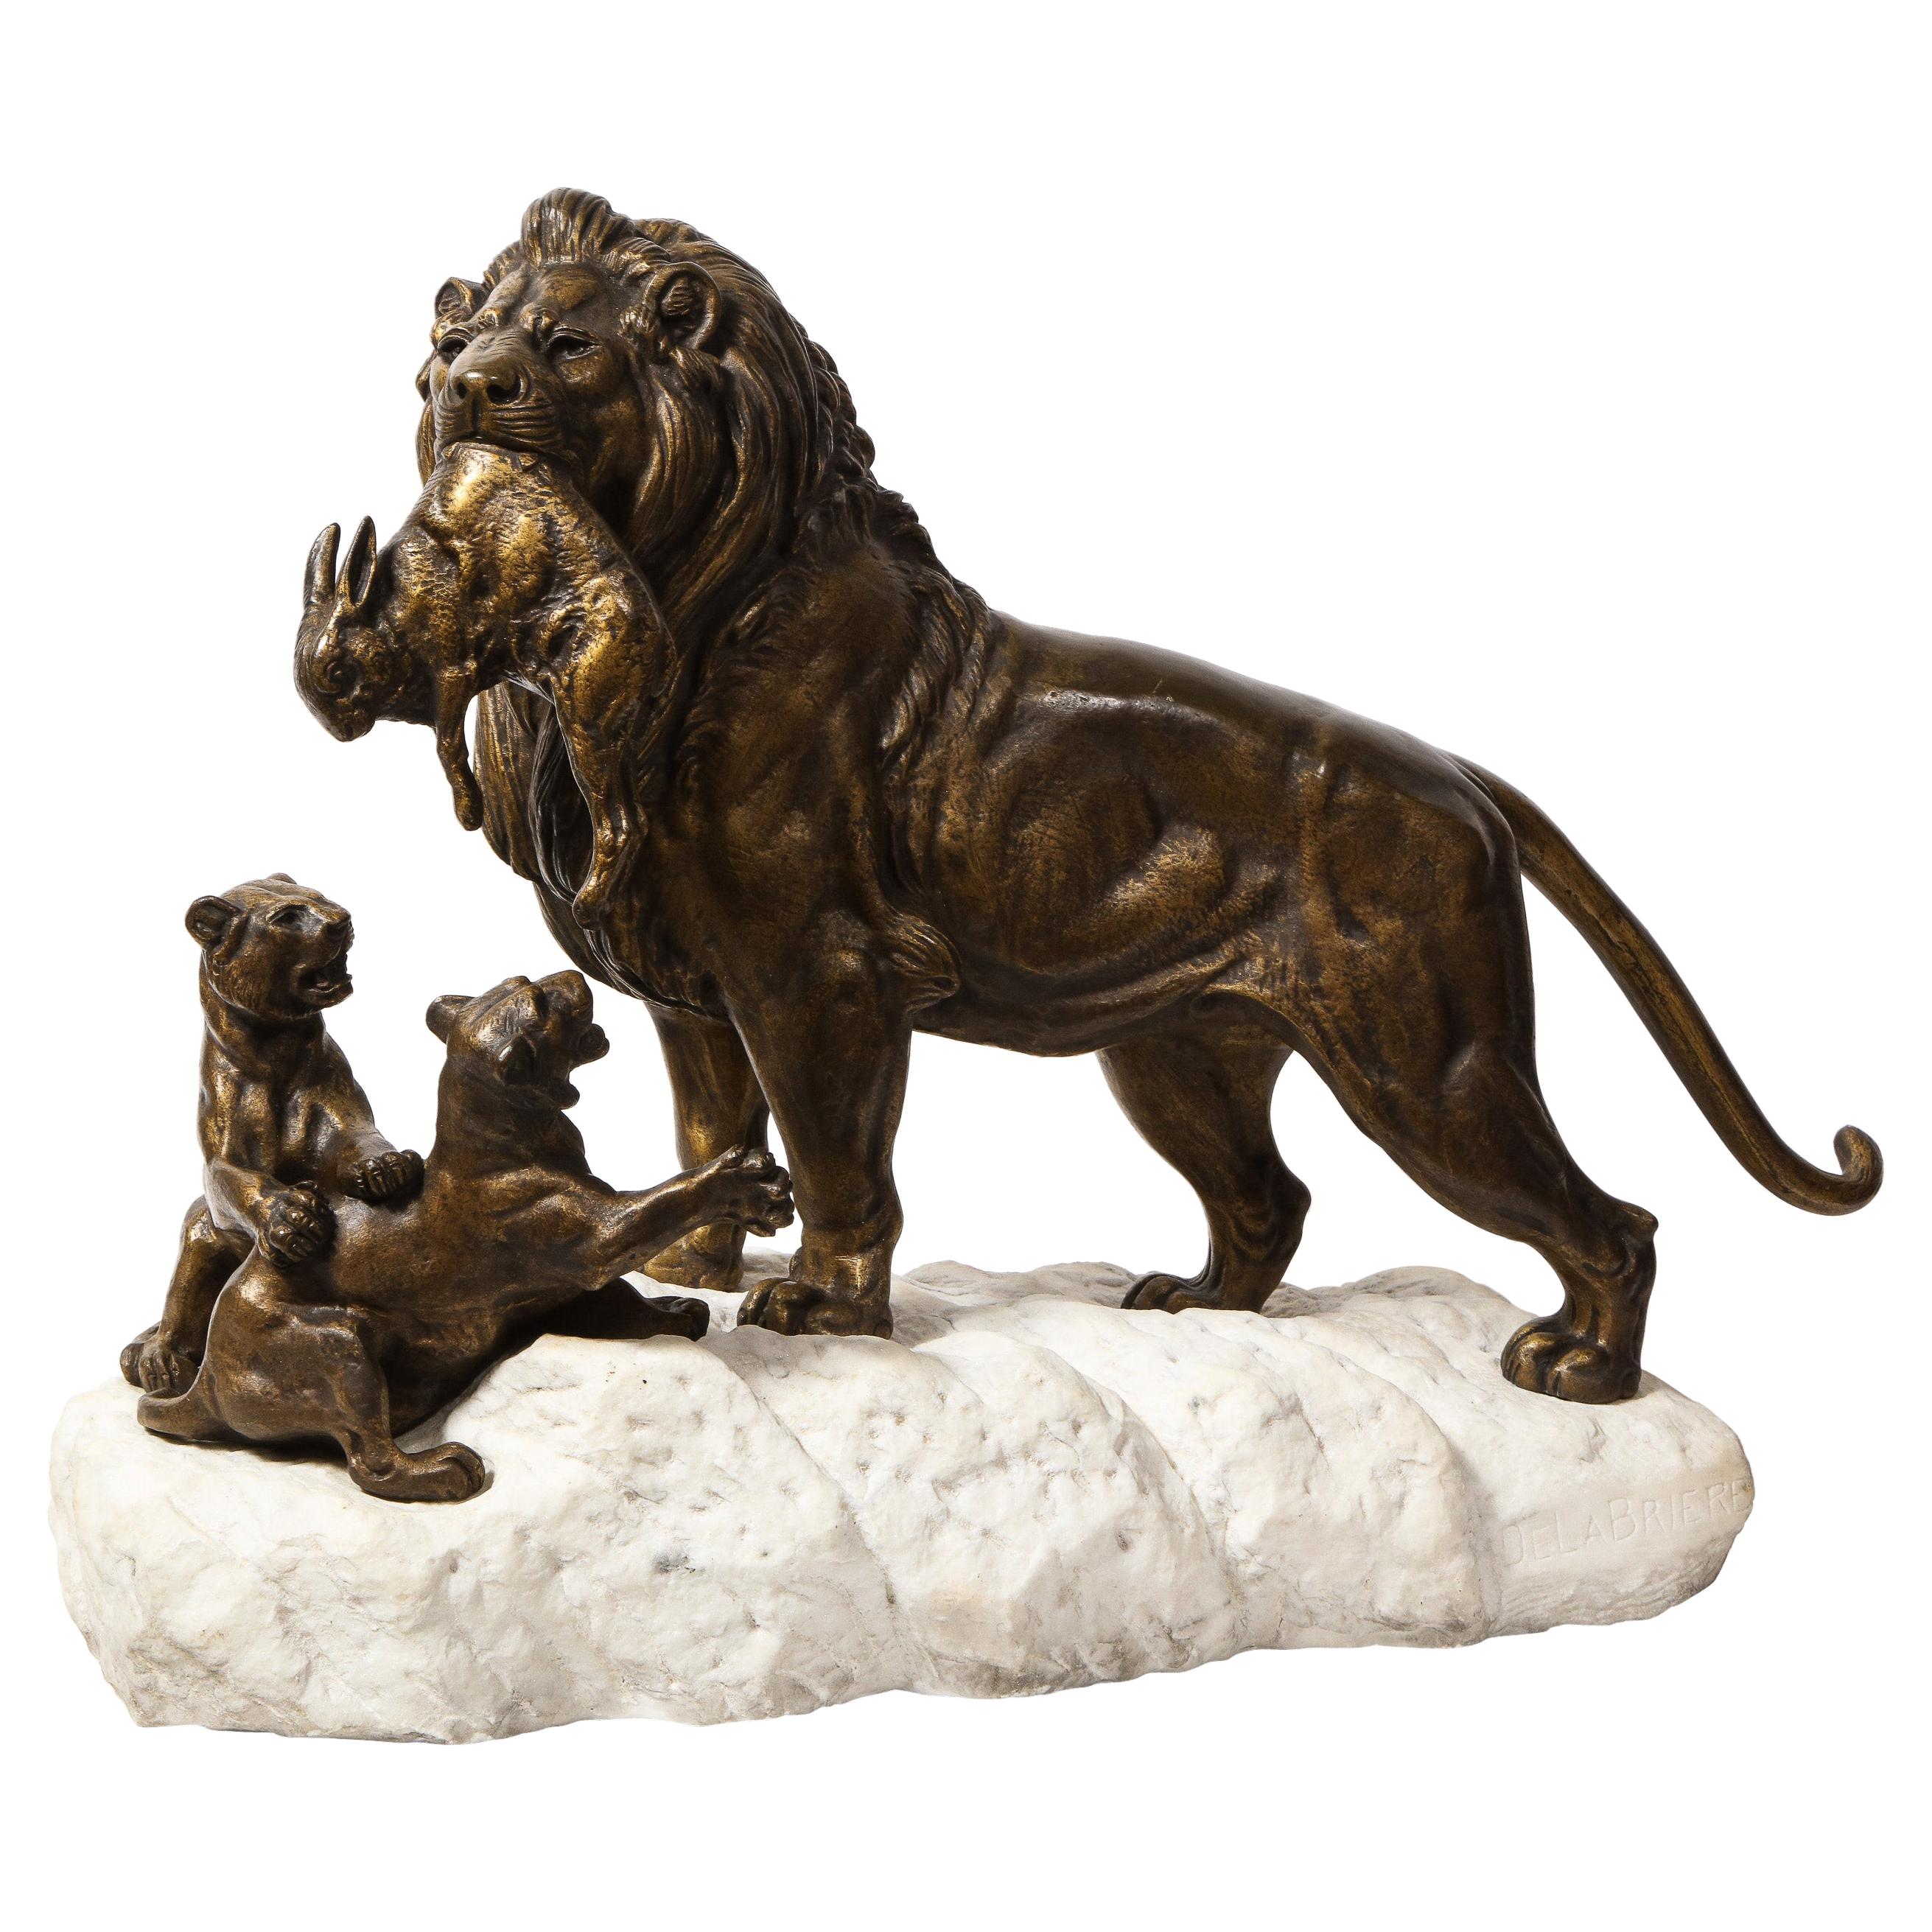 Paul-Edouard Delabriere 'French, 1829-1923' Large Bronze Sculpture of A Lion